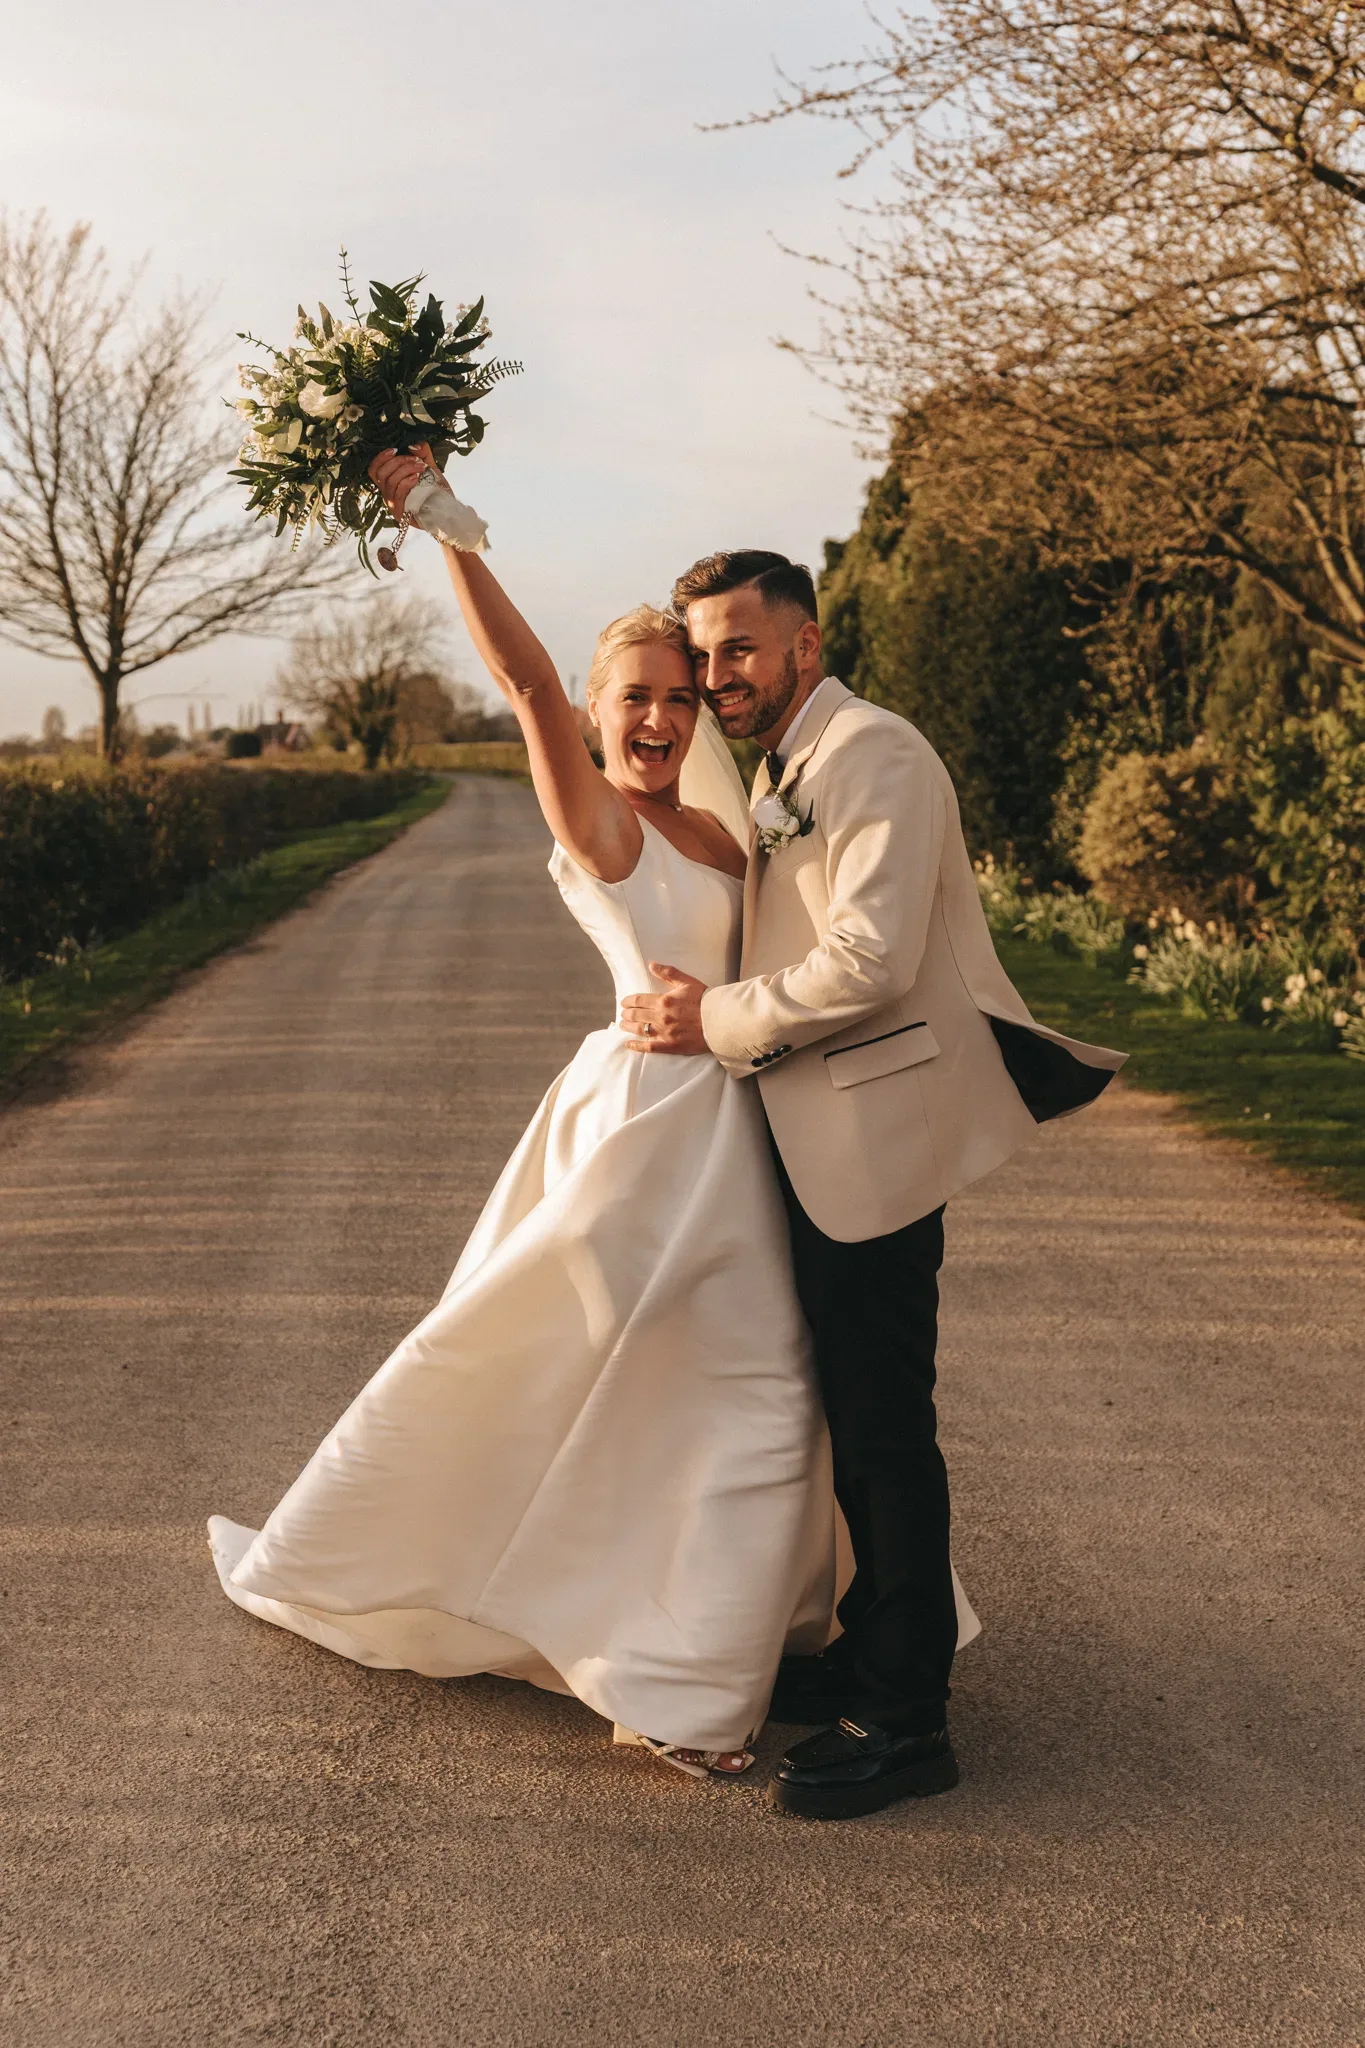 A joyful bride and groom celebrate outdoors on a sunny day. the bride, in a classic white gown, raises a bouquet triumphantly as the groom, in a beige suit, embraces her waist. a rural road with greenery surrounds them.